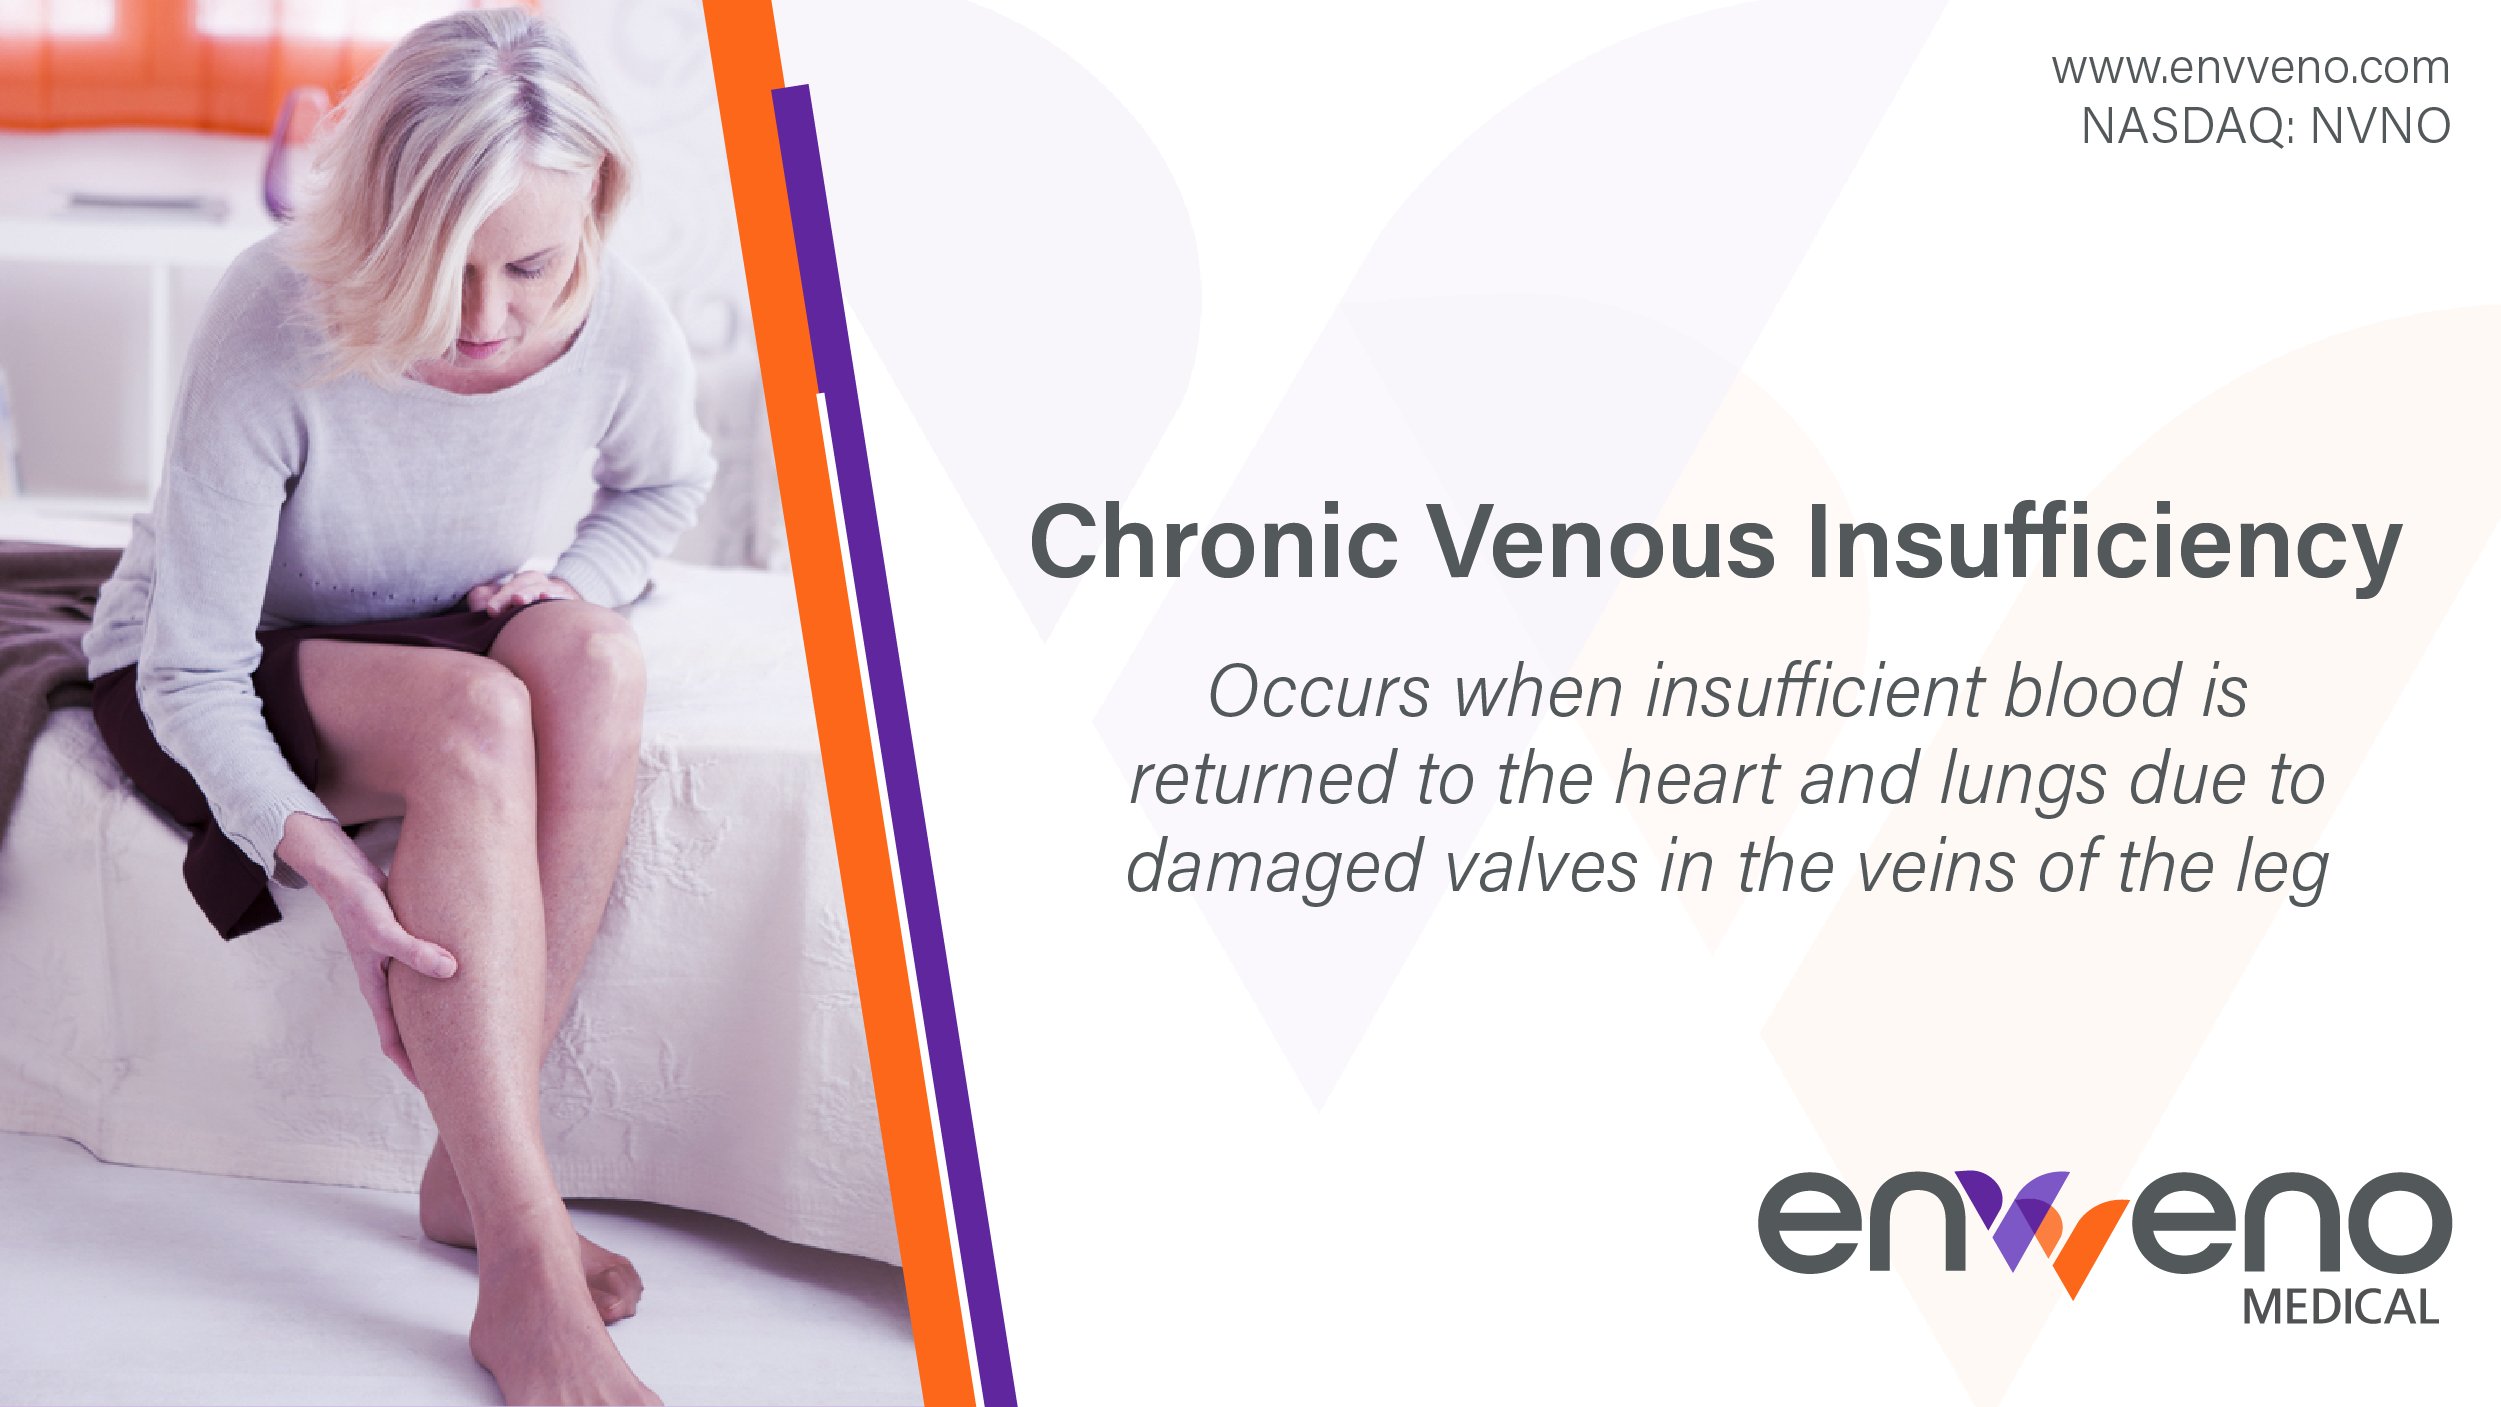 enVVeno Medical on X: Chronic Venous Insufficiency occurs when  insufficient blood is returned to the heart and lungs due to damaged valves  in the veins of the leg.  $NVNO #VenousDisease #CVI #